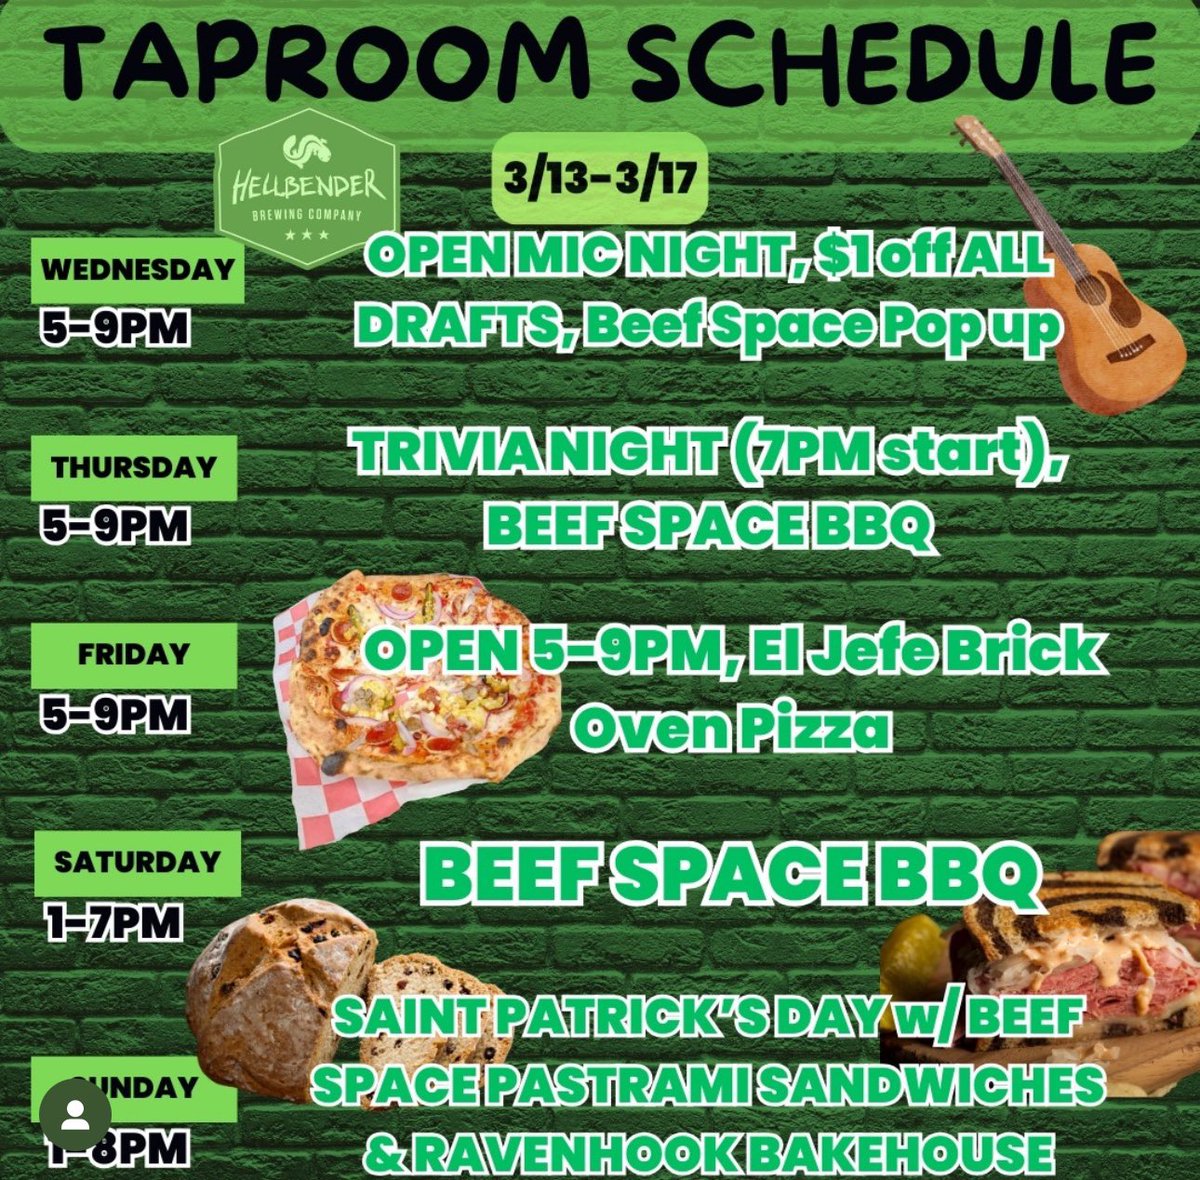 Beer, food, and events this week: We'll have the usual lineup of events through Sunday, at which point Ravenhook bakehouse will be here selling Irish soda bread and other baked goods. We'll also have pint specials all day, and Beef Space will have pastrami brisket ruebens!